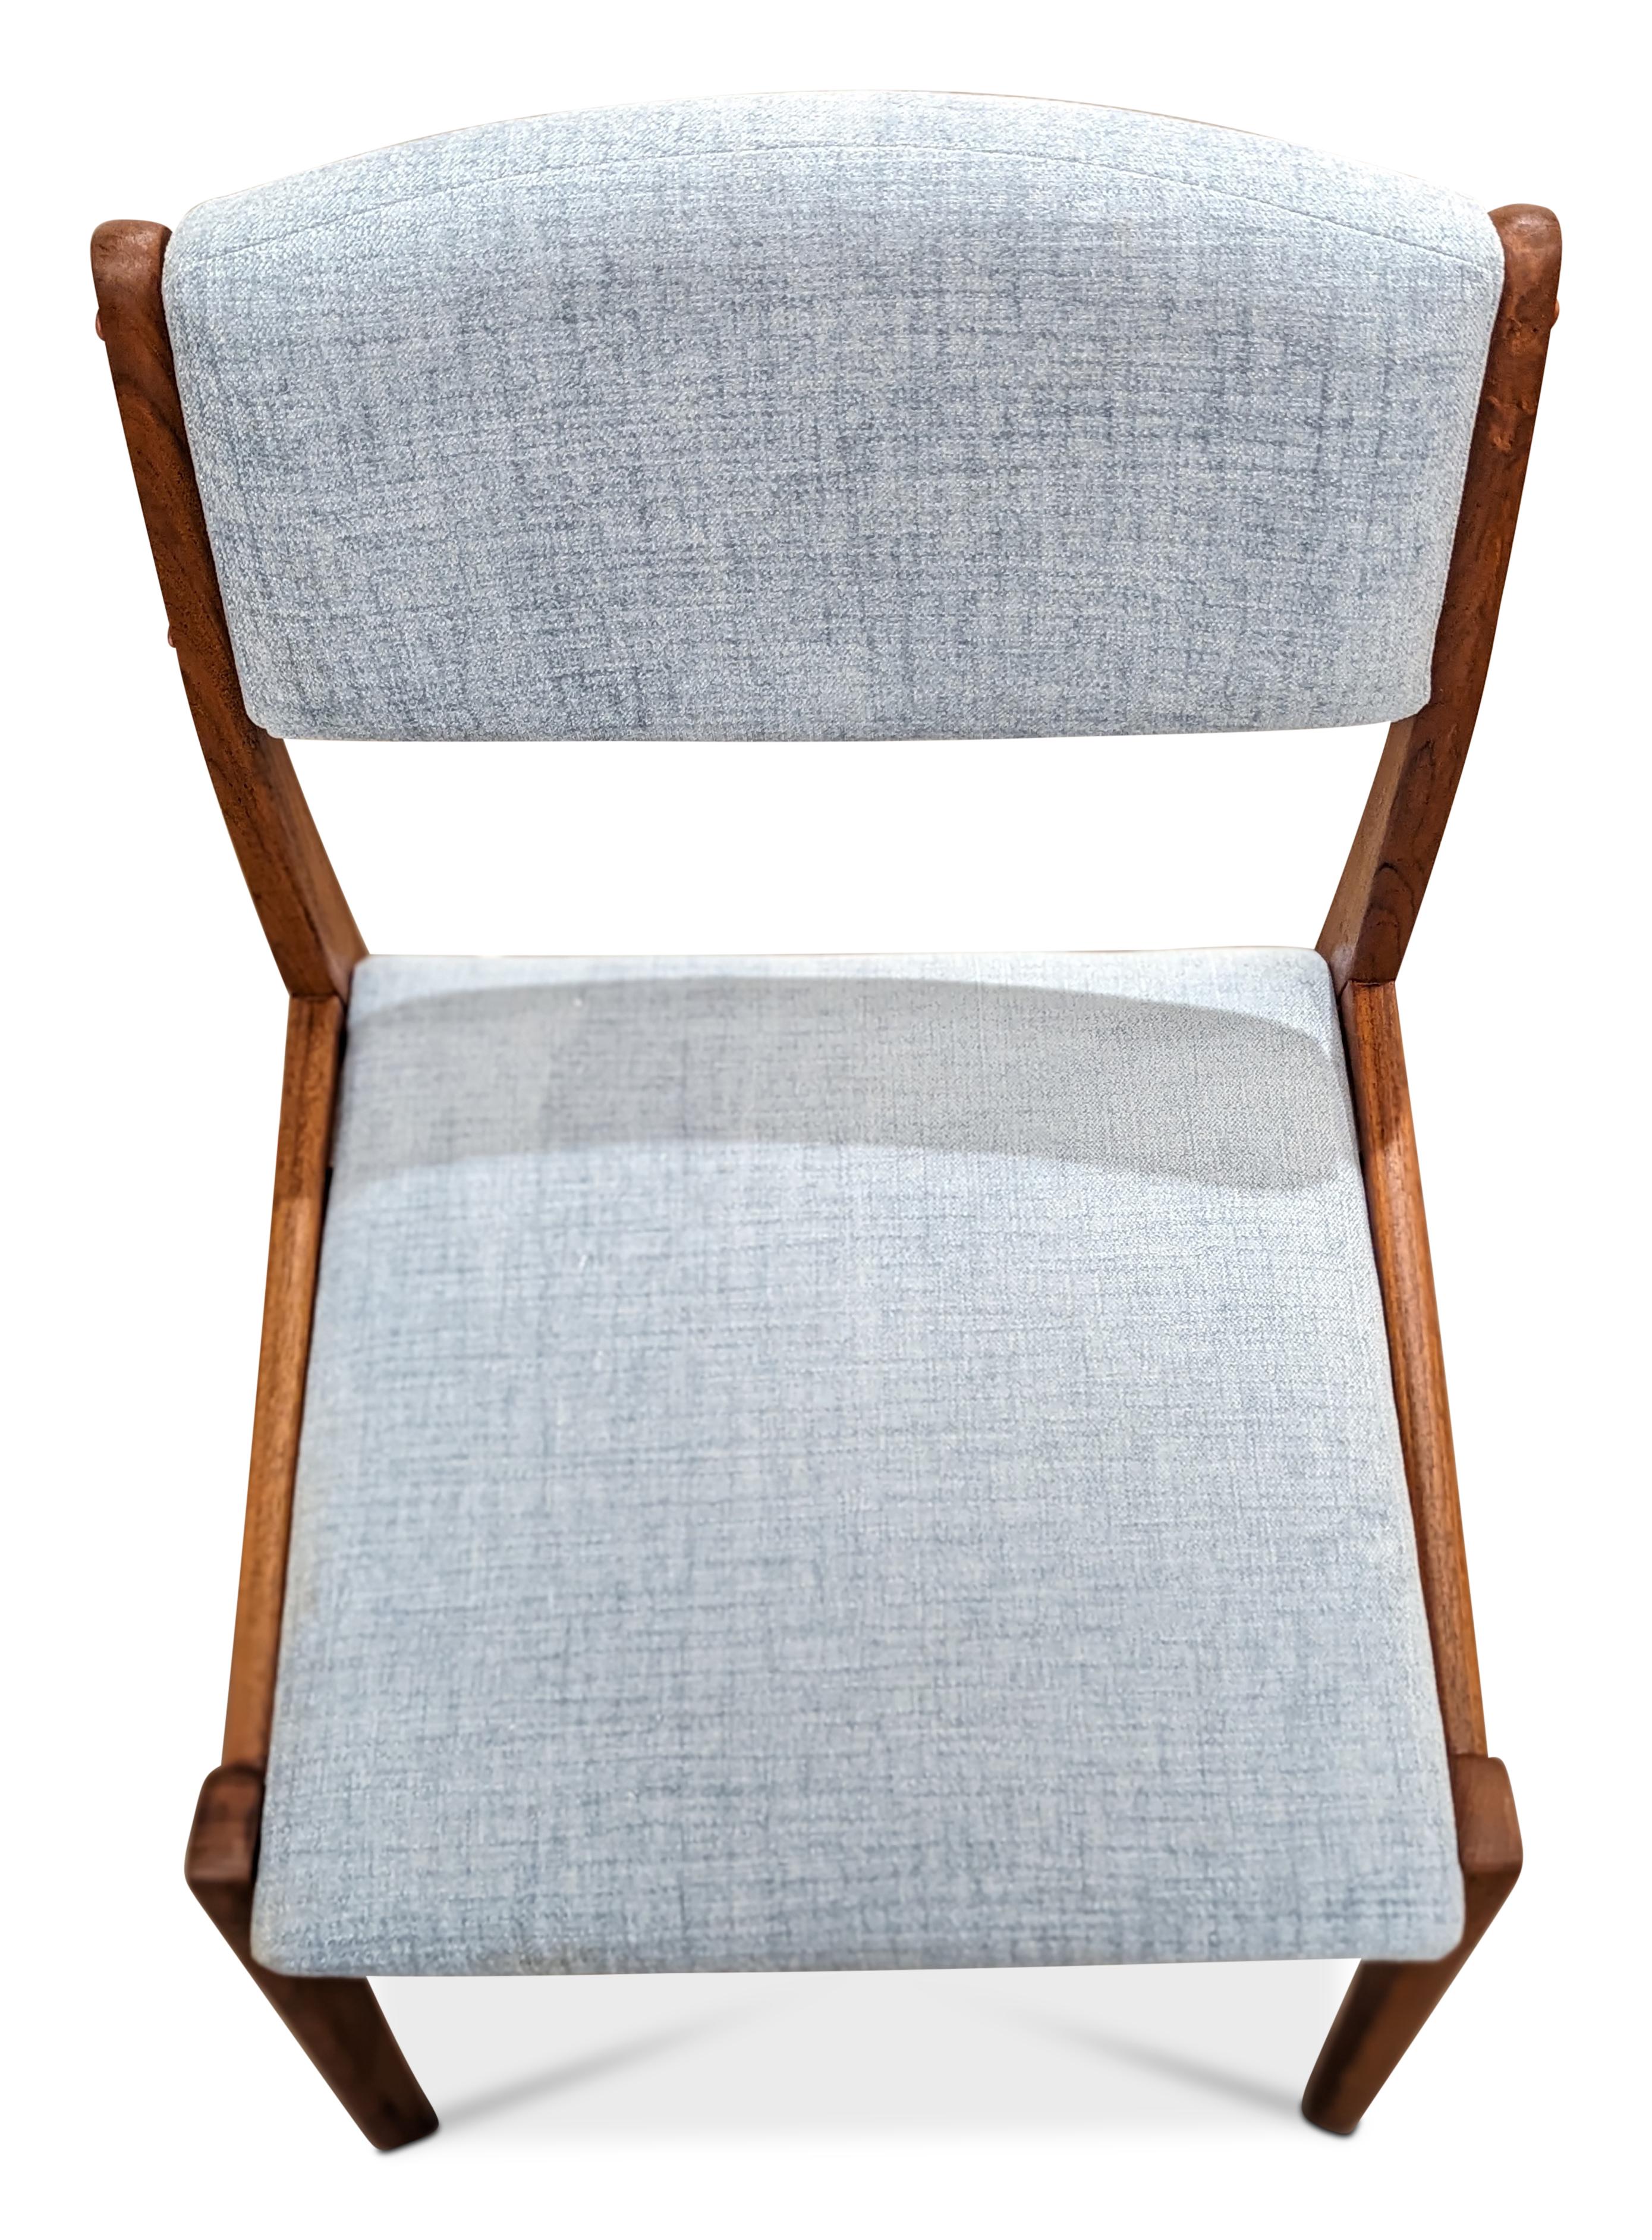 Vintage Danish mid-century modern, made in the 1950's - Recently refurbished

New Foam and upholstery. Light Blue

The piece is more than 65+ years old and some wear and tear can be expected, but we do everything we can to refurbish them in respect